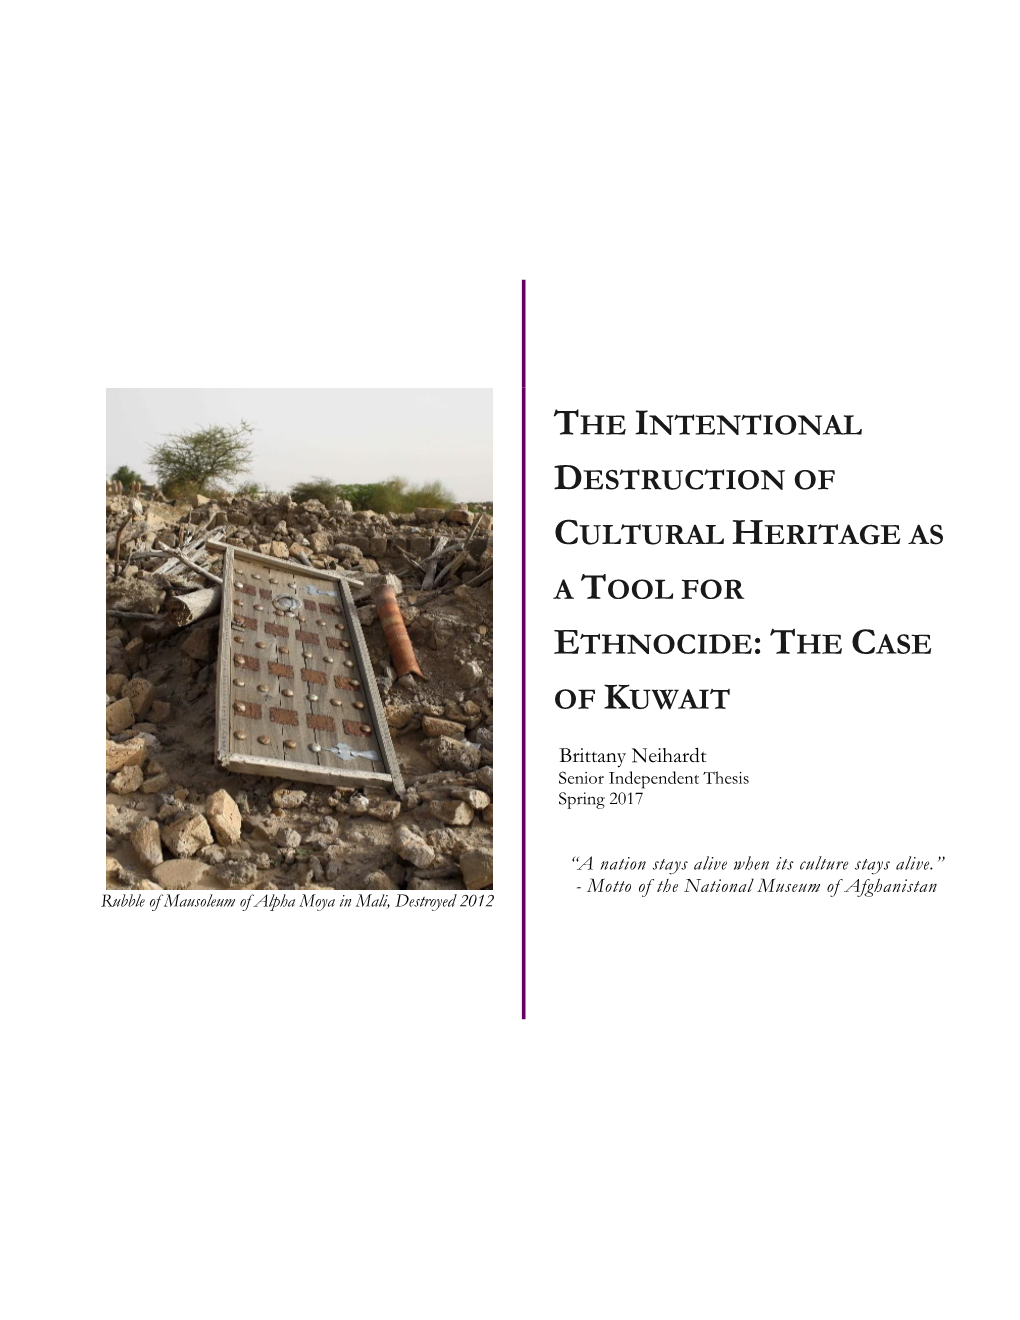 The Intentional Destruction of Cultural Heritage As a Tool for Ethnocide: the Case of Kuwait